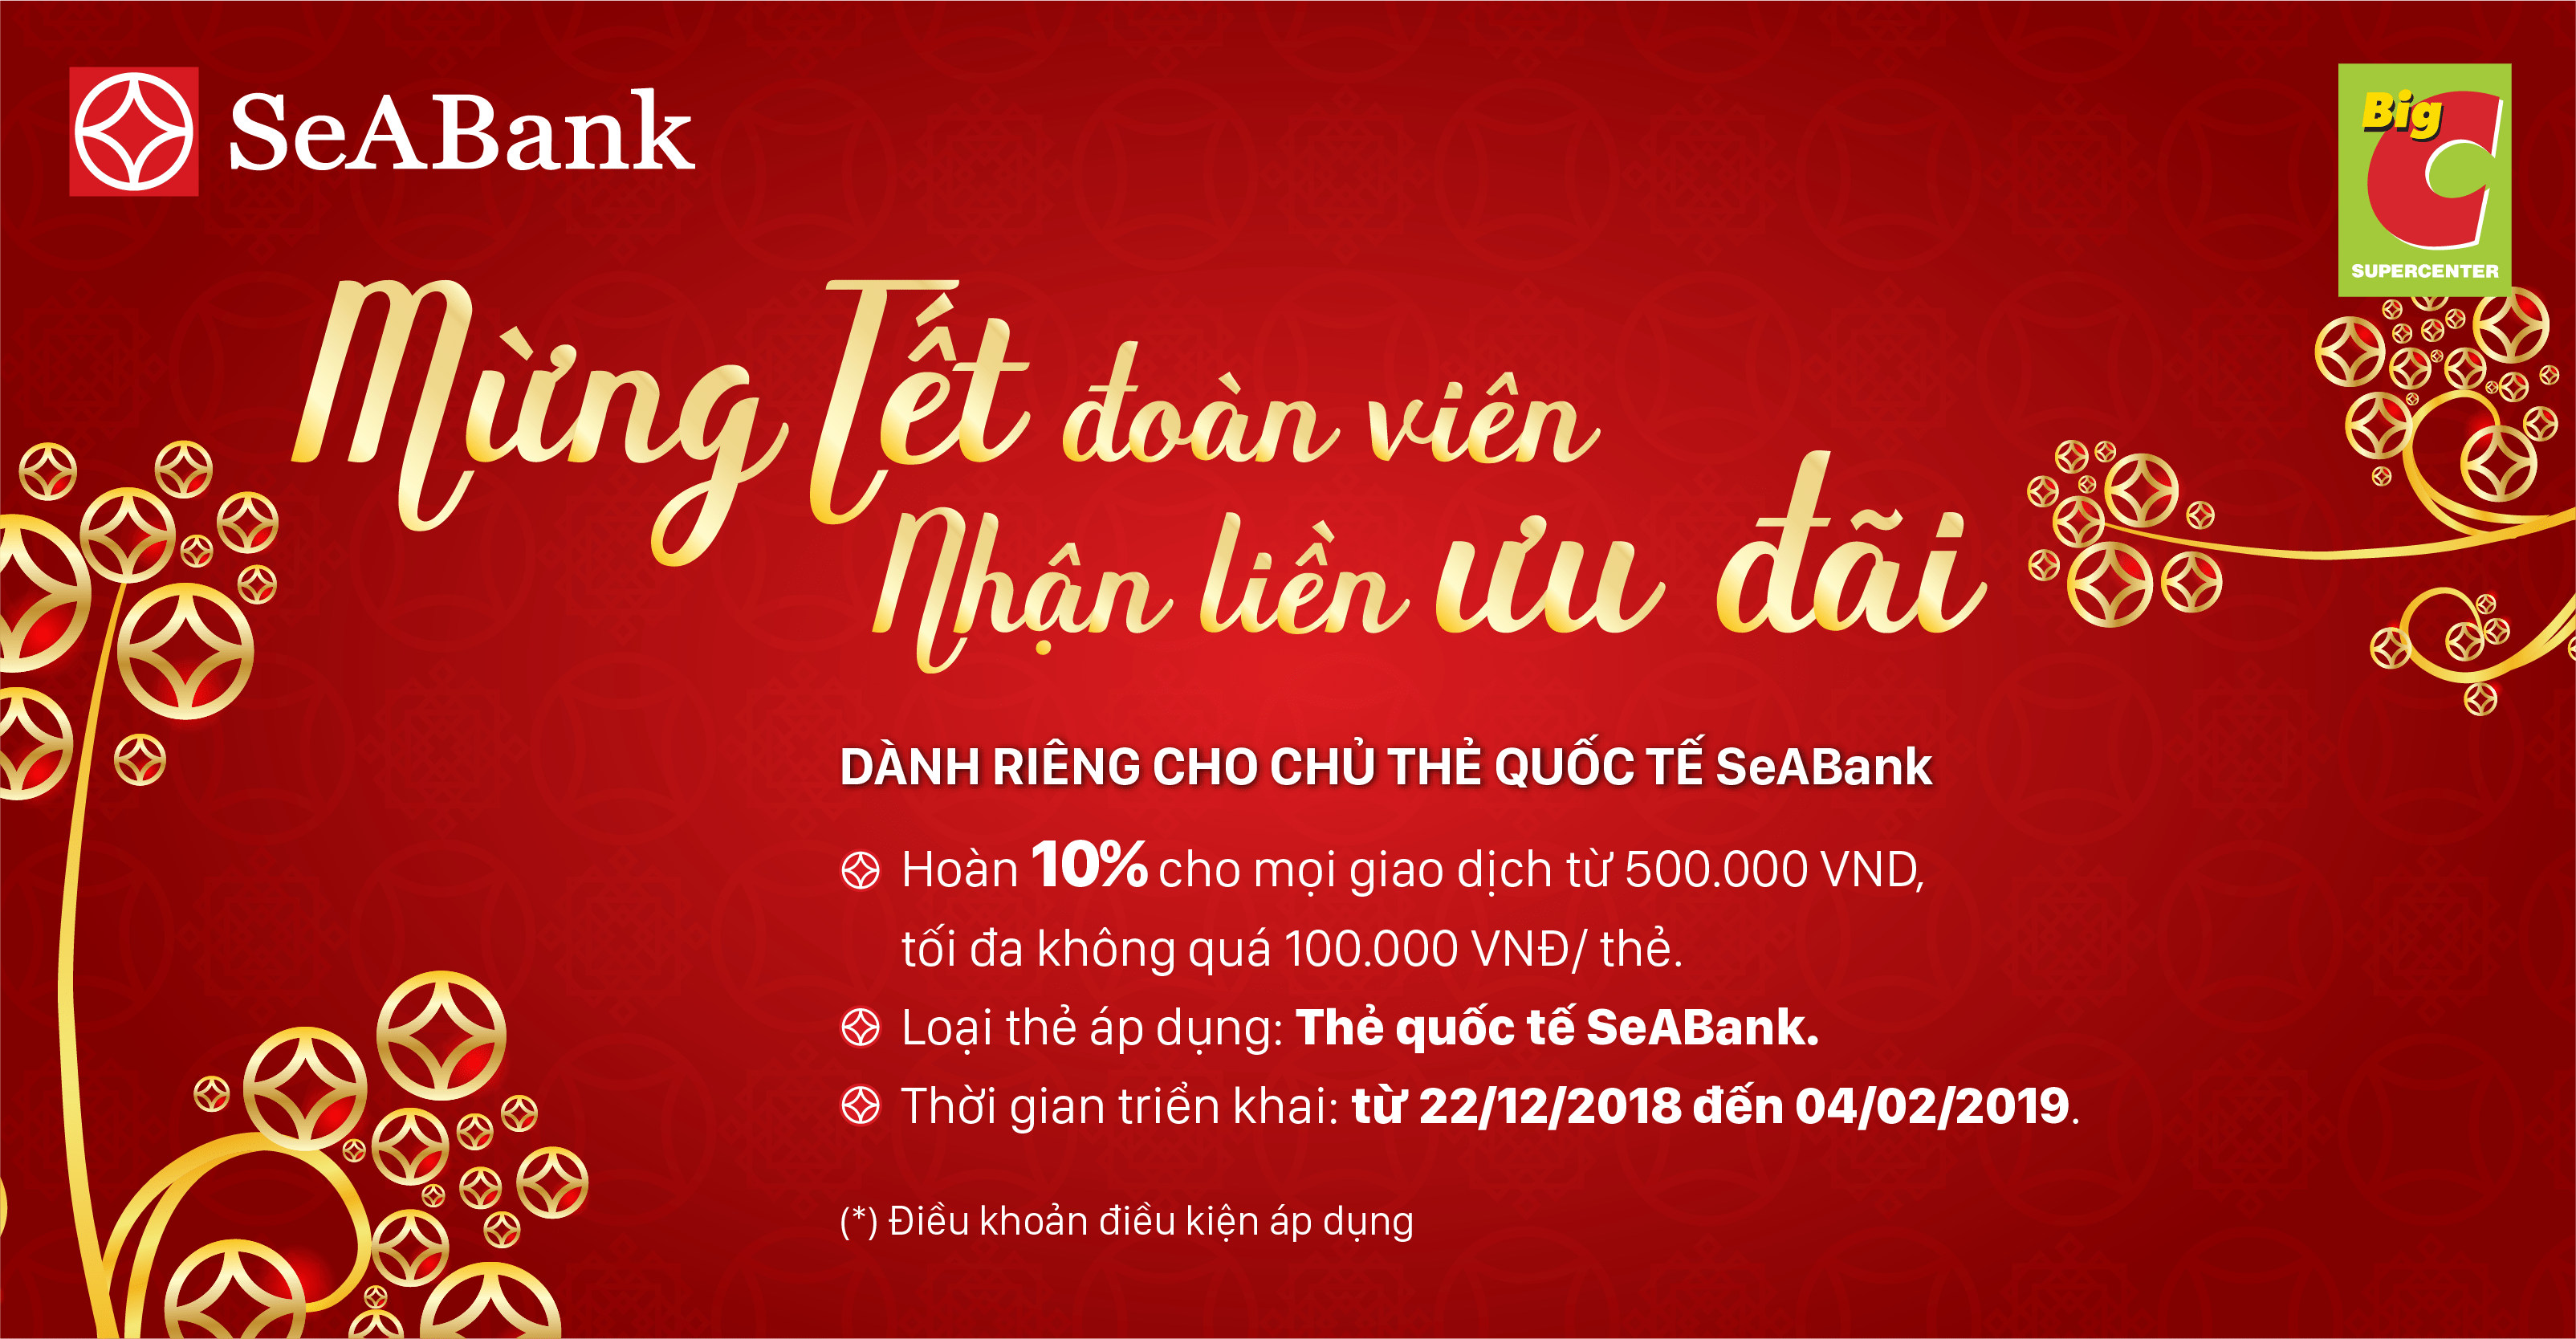 SeABank’s Tet Promotion: Shop more, pay less with 10% cashback 